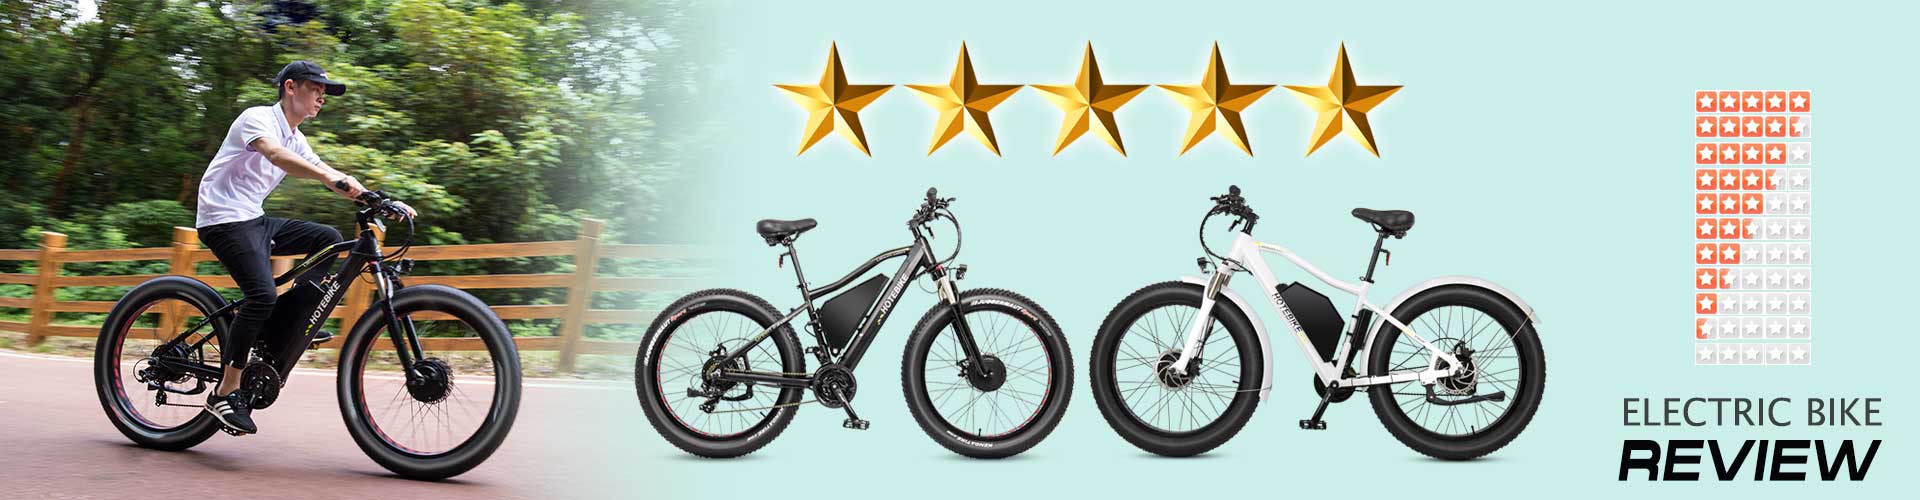 Electric bike review